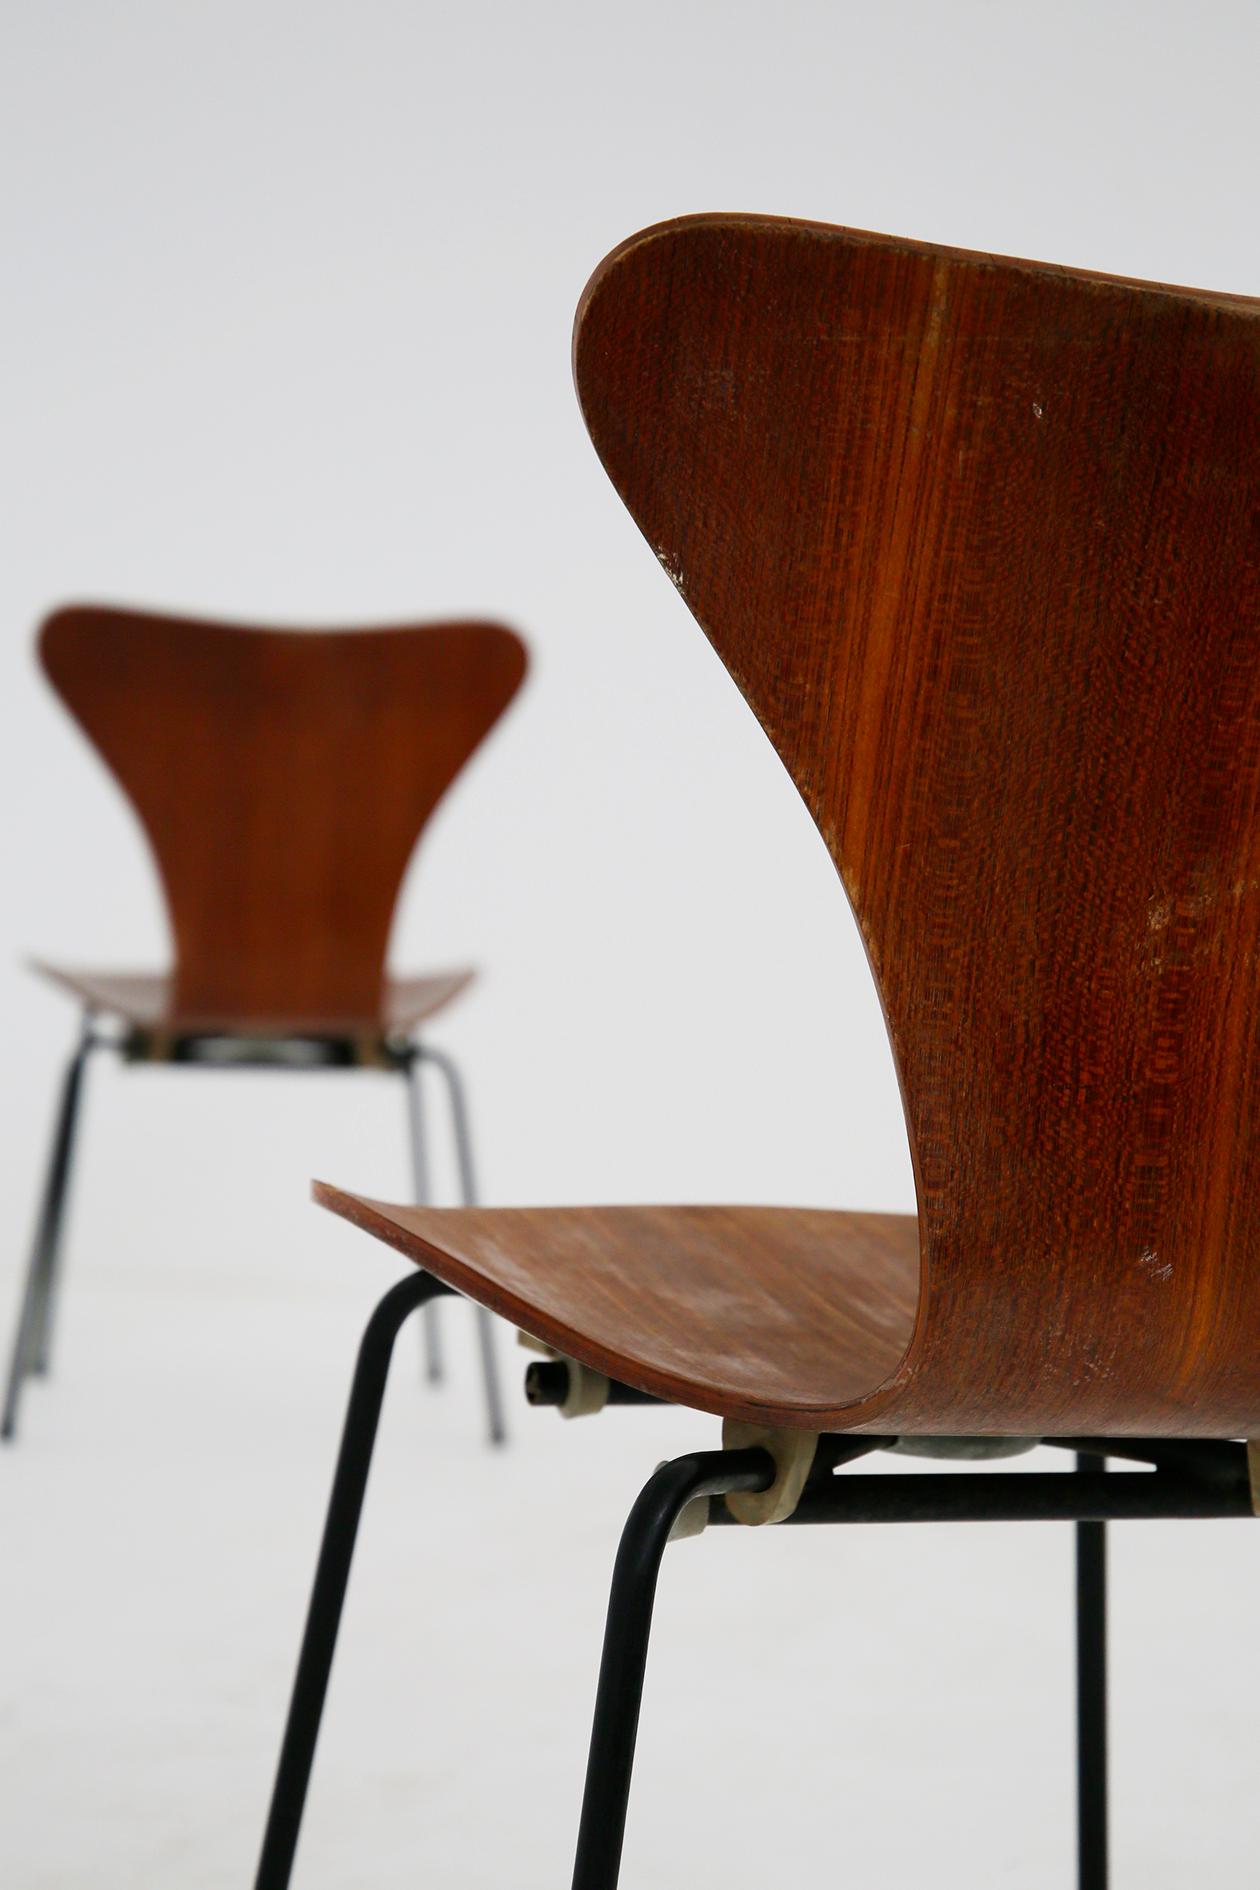 Set of Six Chairs by Arne Jacobsen M. Butterfly for the Brazilian Airline, 1950s For Sale 1